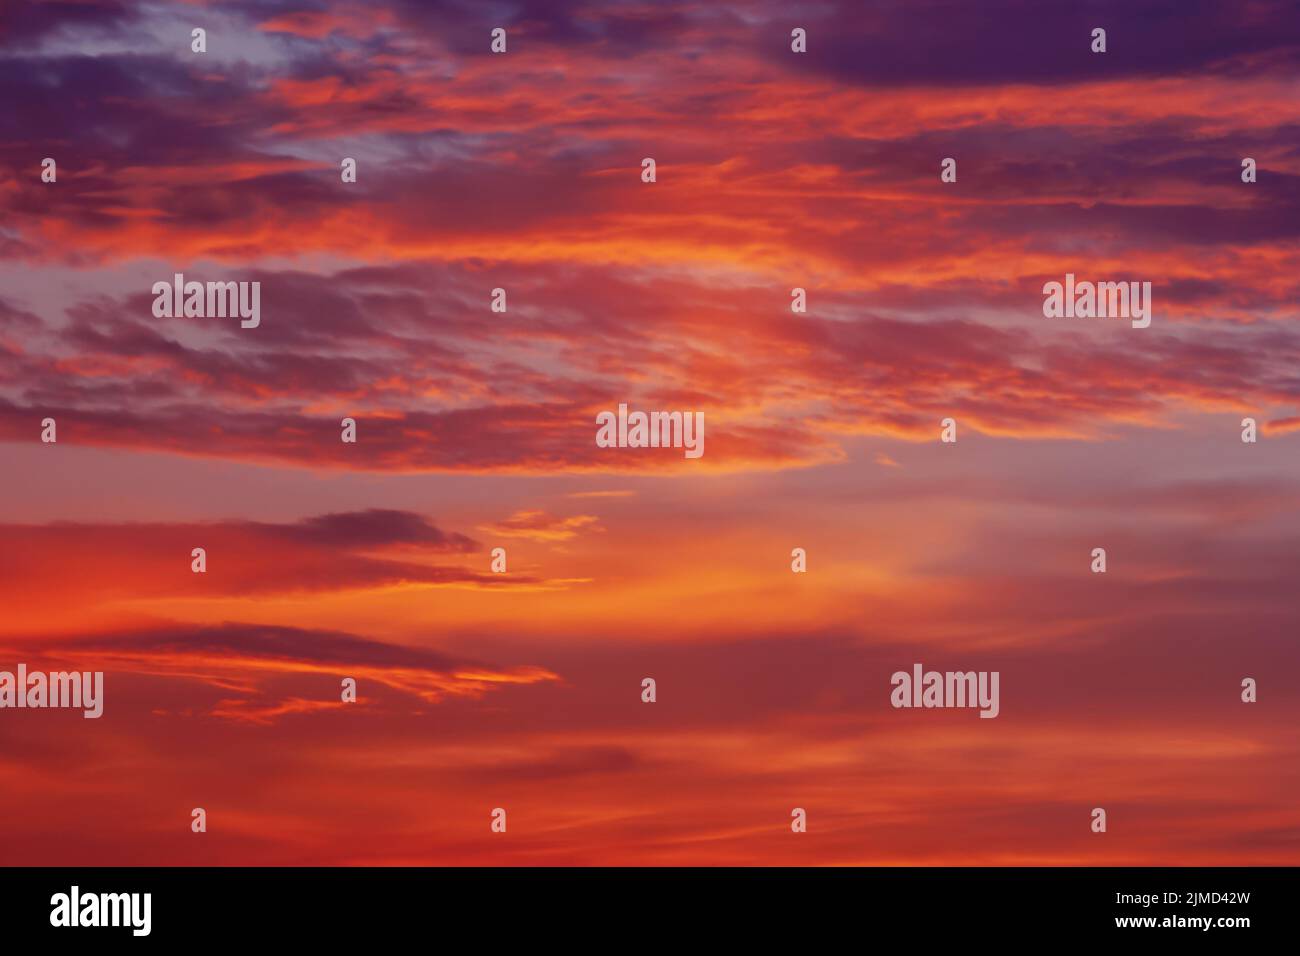 Red orange purple colorful clouds in darkening sky at sunset Stock Photo